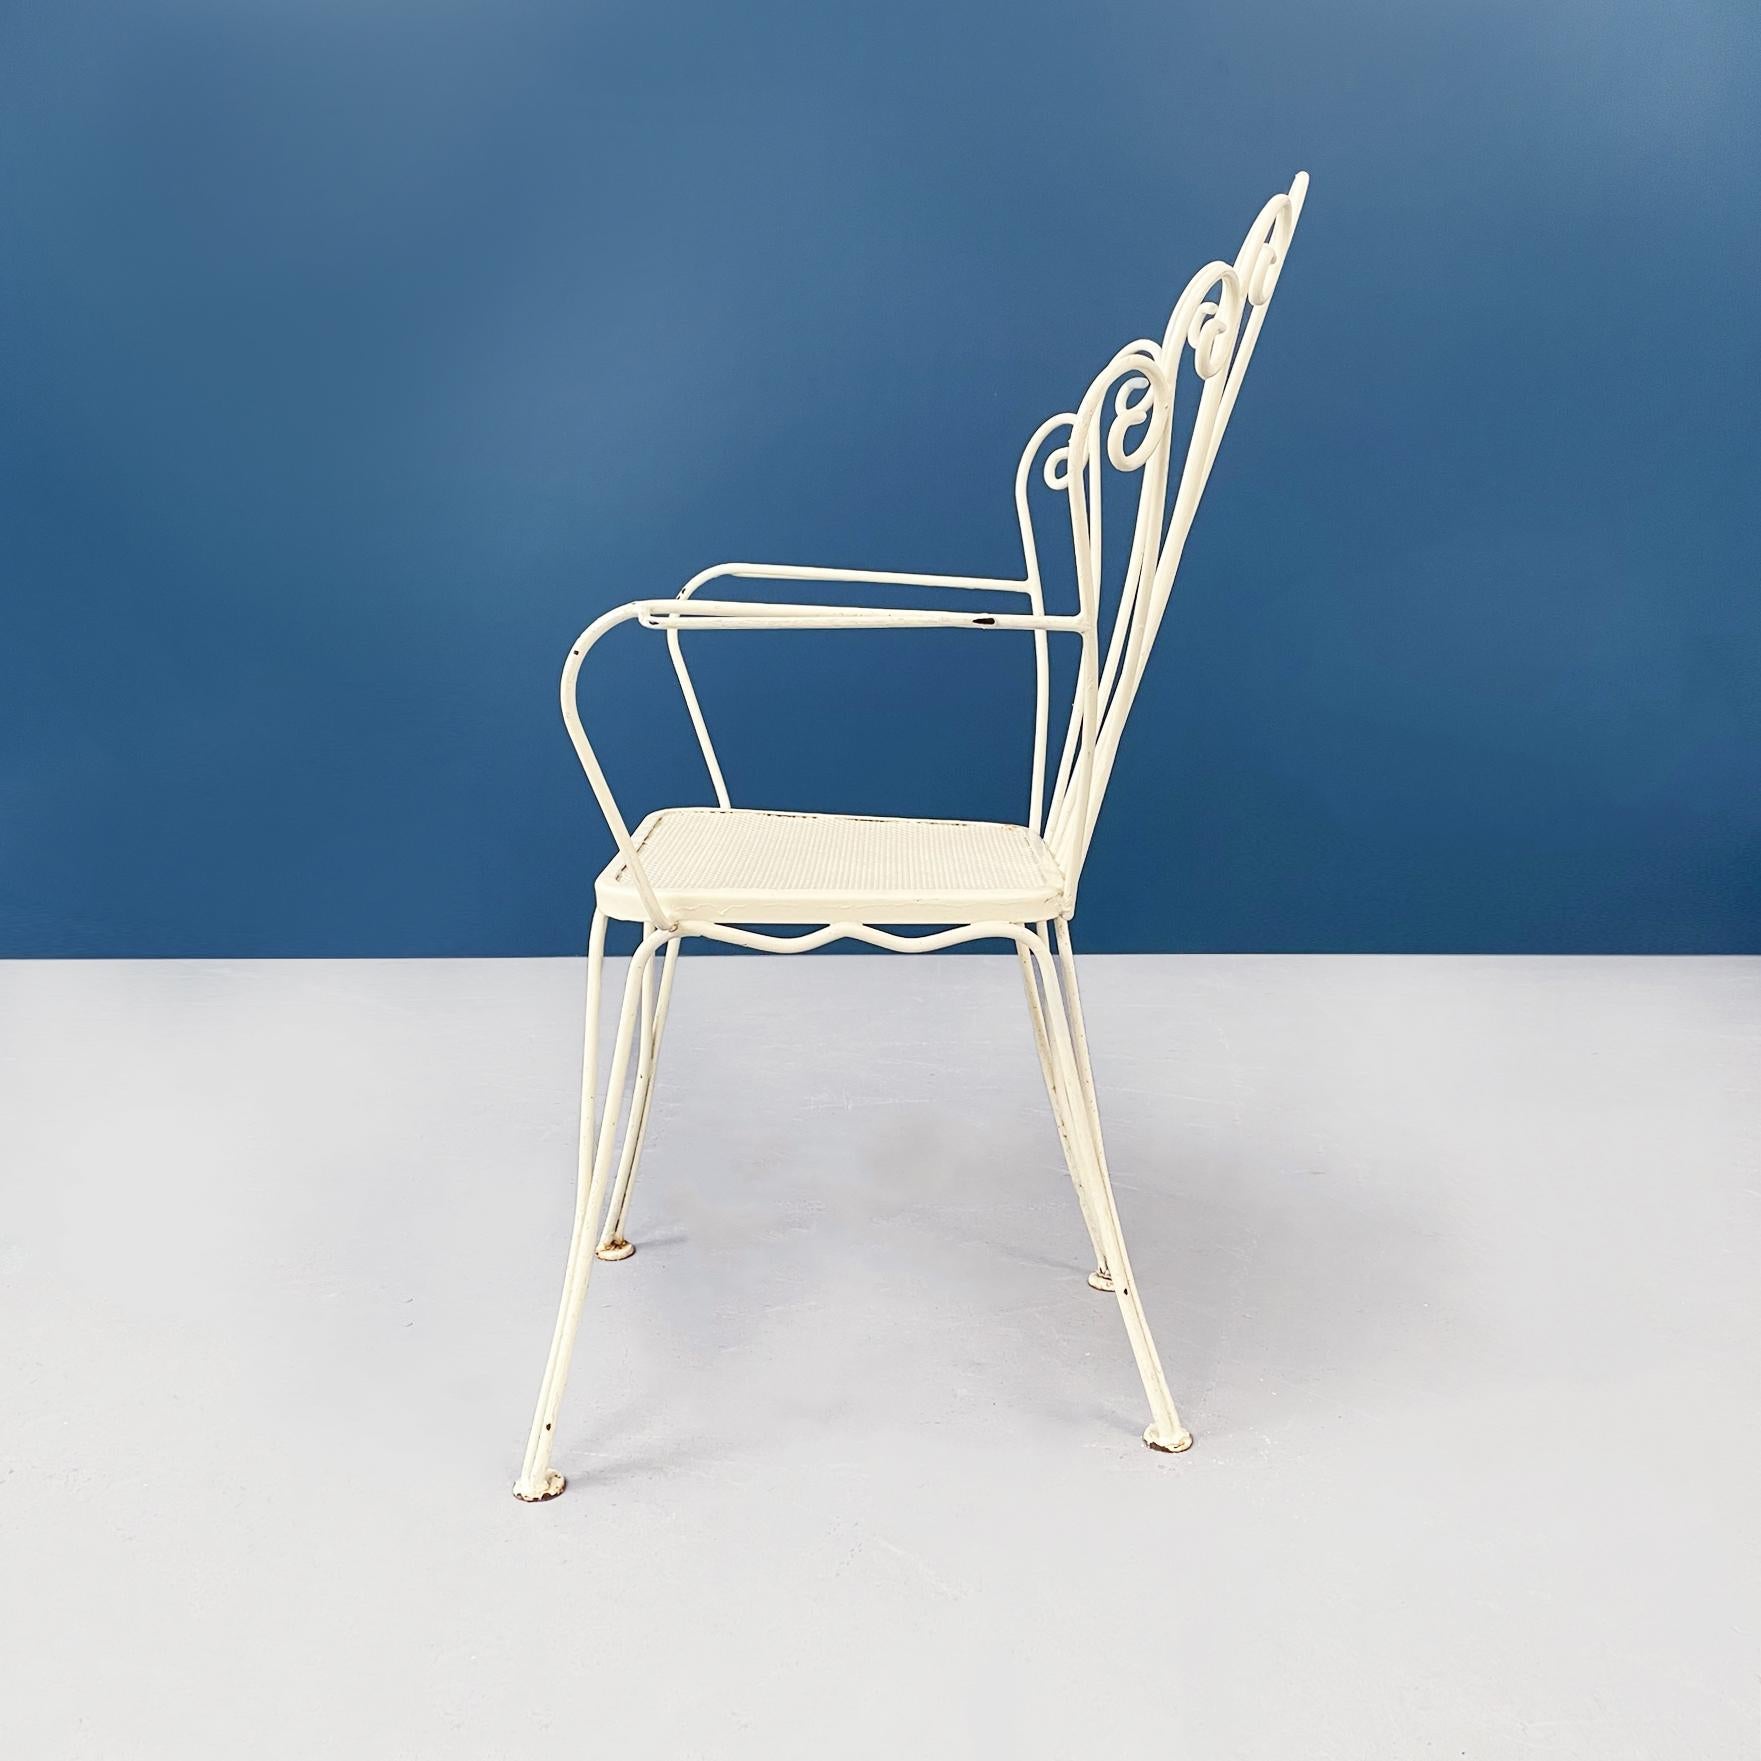 Italian Mid-Century Modern Garden Chairs and Table in White Wrought Iron, 1960s In Good Condition For Sale In MIlano, IT